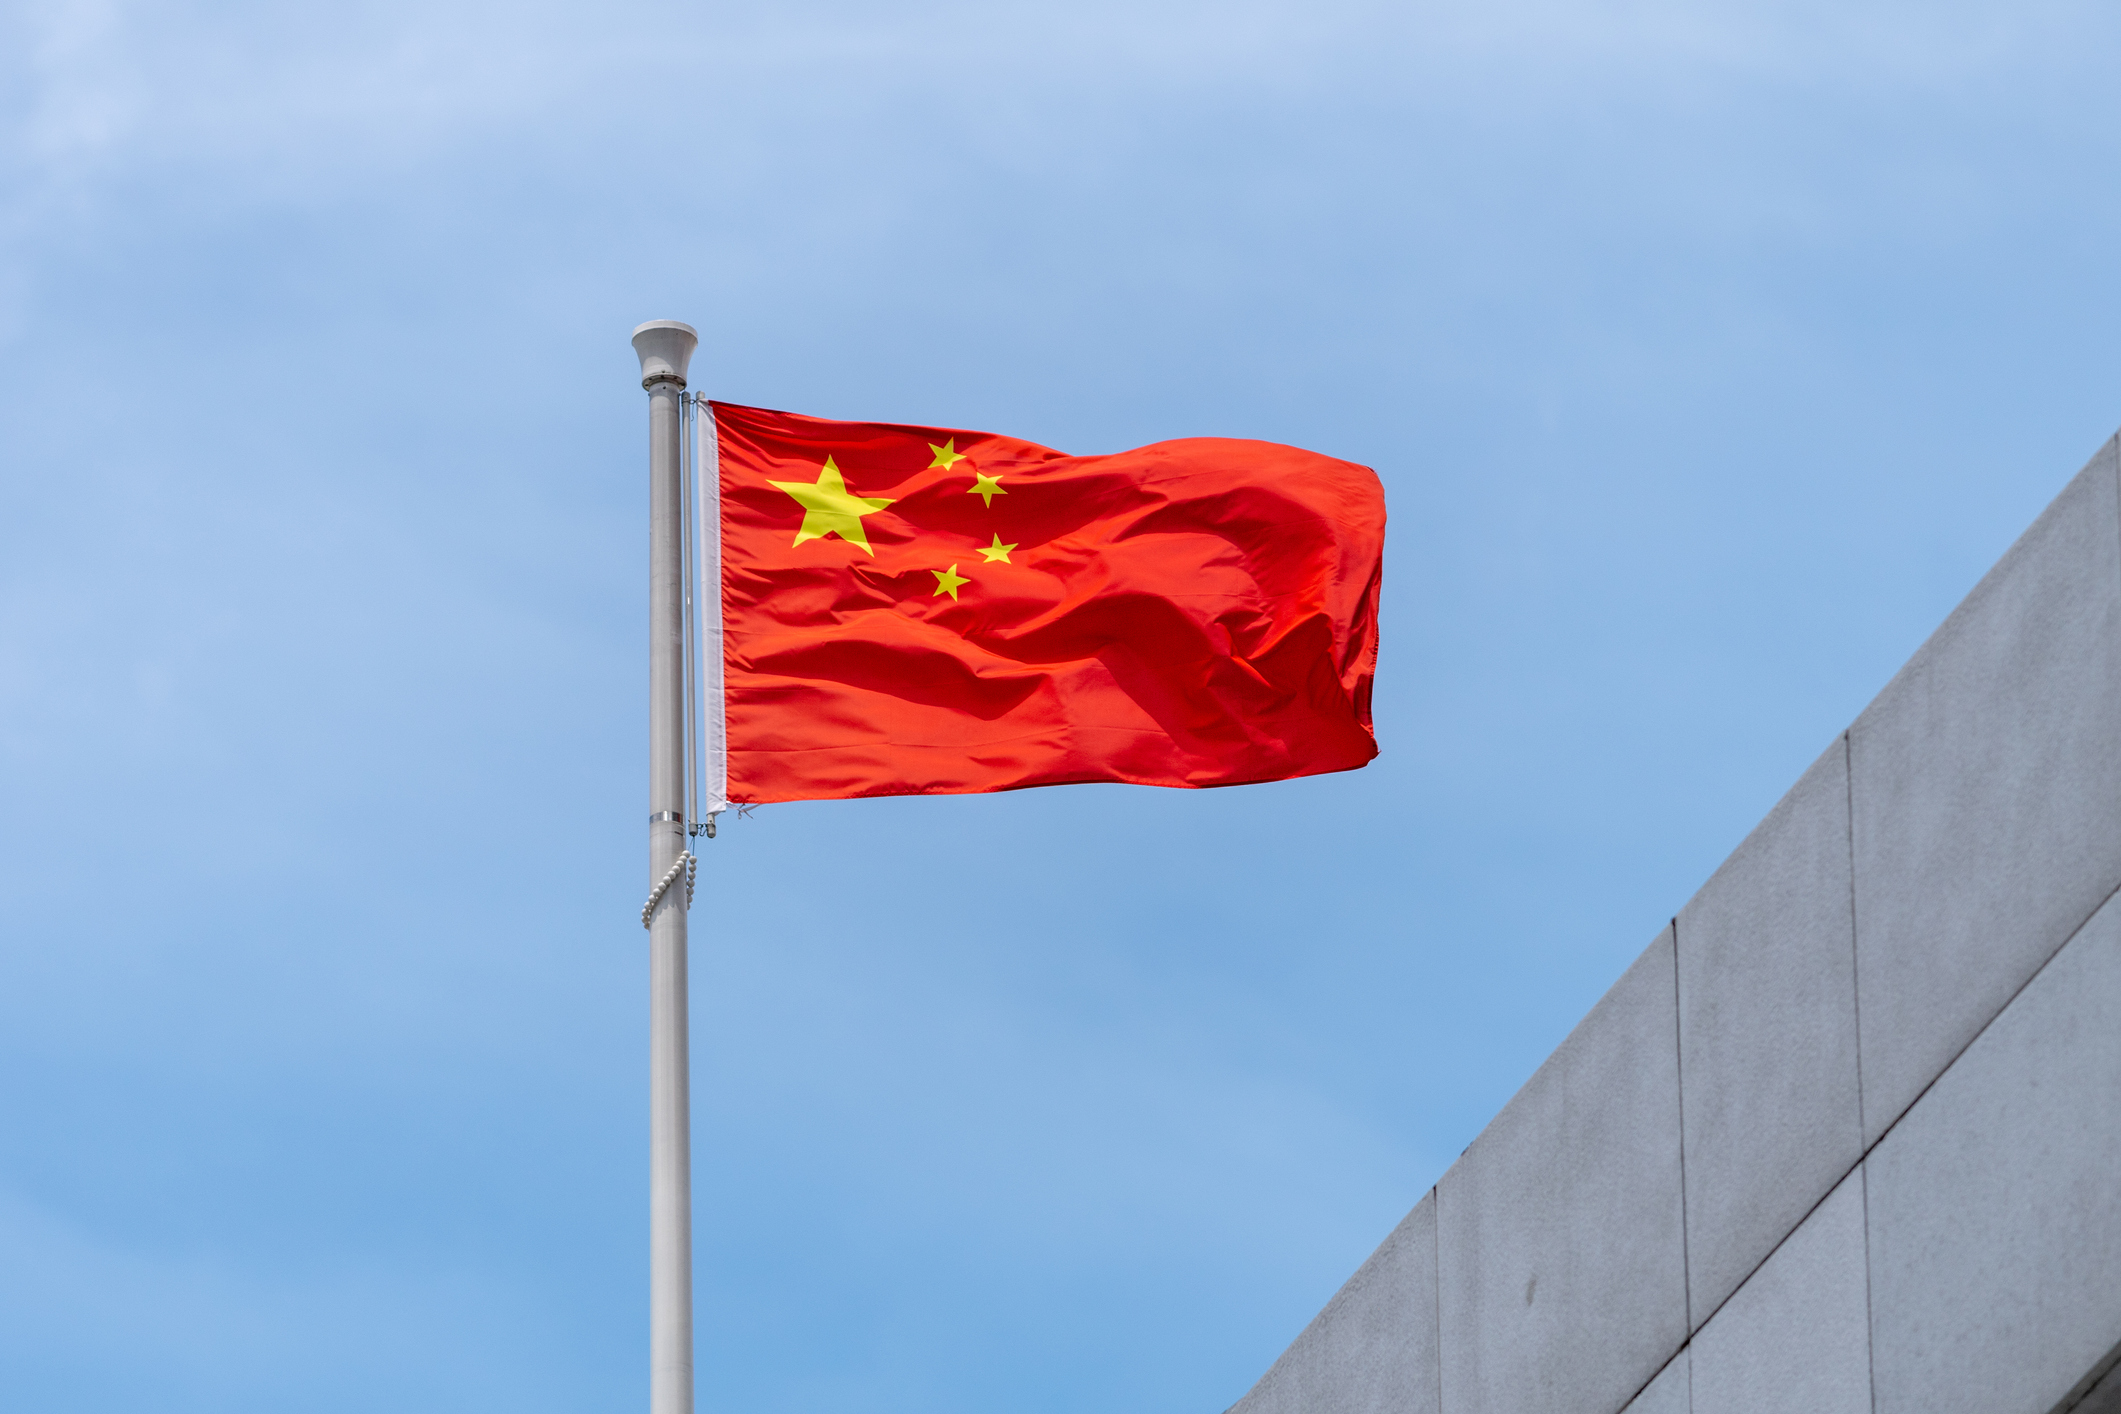 On Dec. 11, 2018 Reuters reported that a former Canadian diplomat has been detained in China after the CFO of Huawei was arrested in Canada. (Richard Sharrocks—Getty Images)